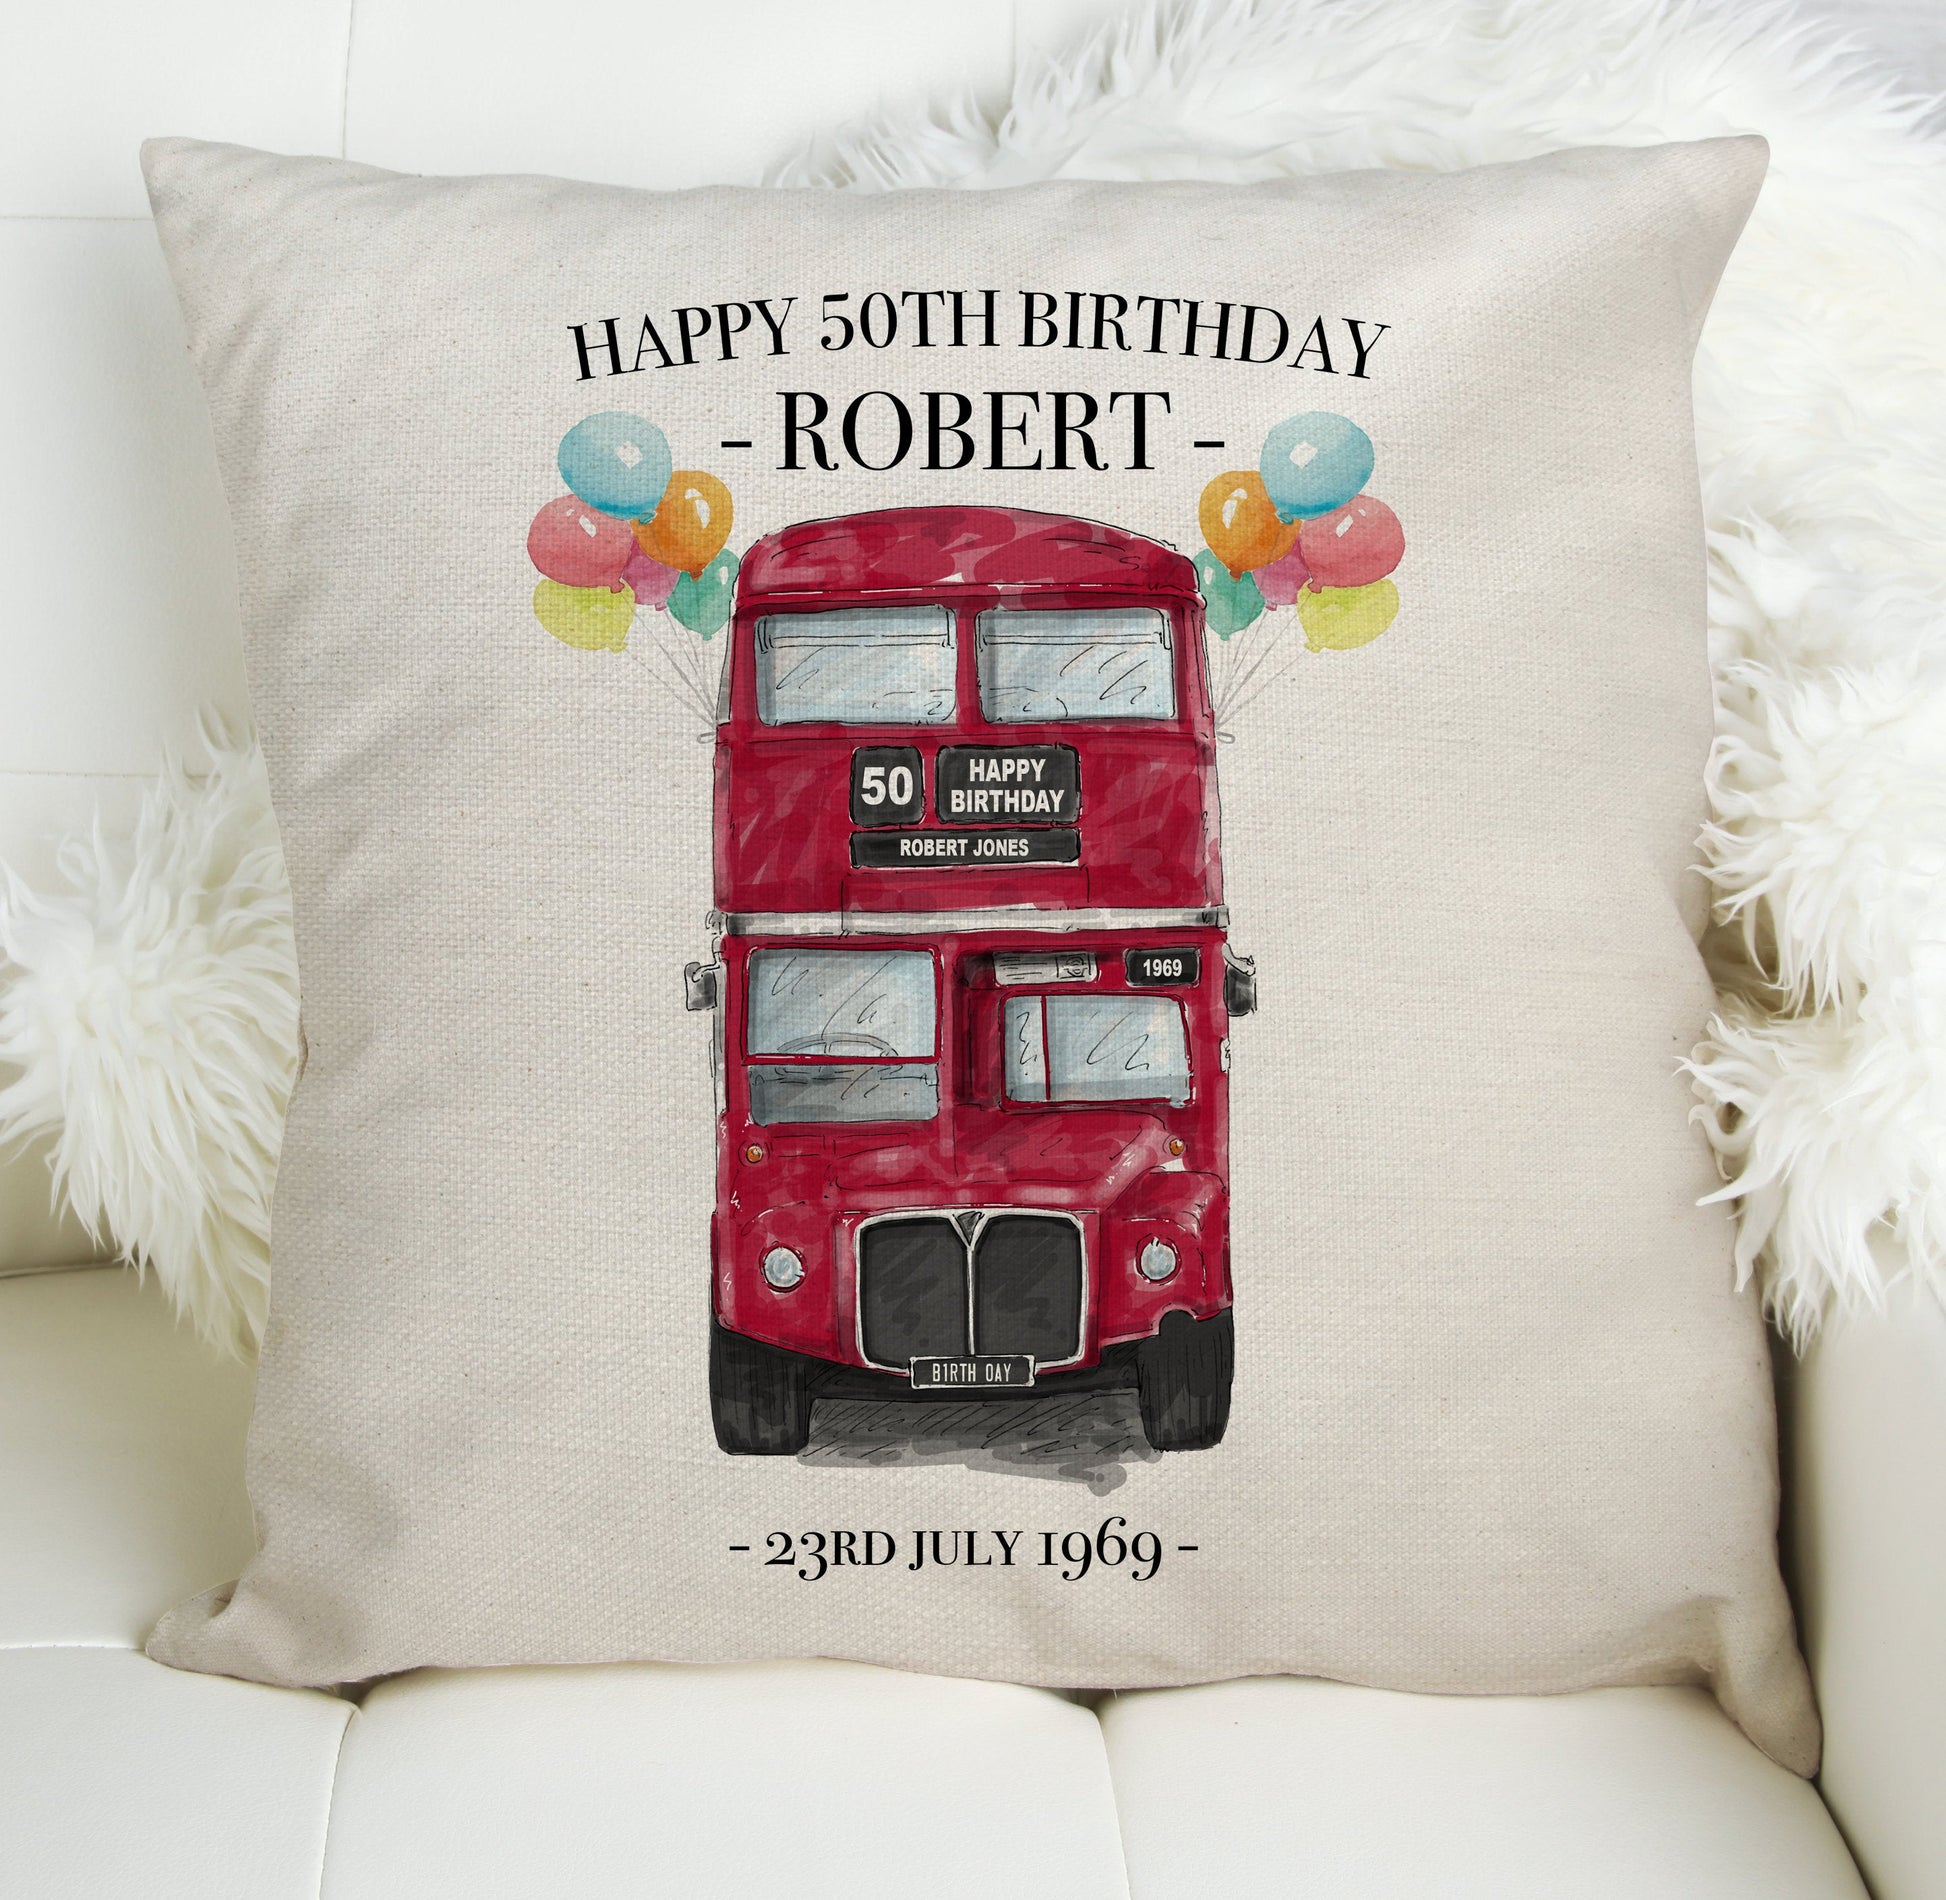 personalised birthday gift London bus cushion cover on chair